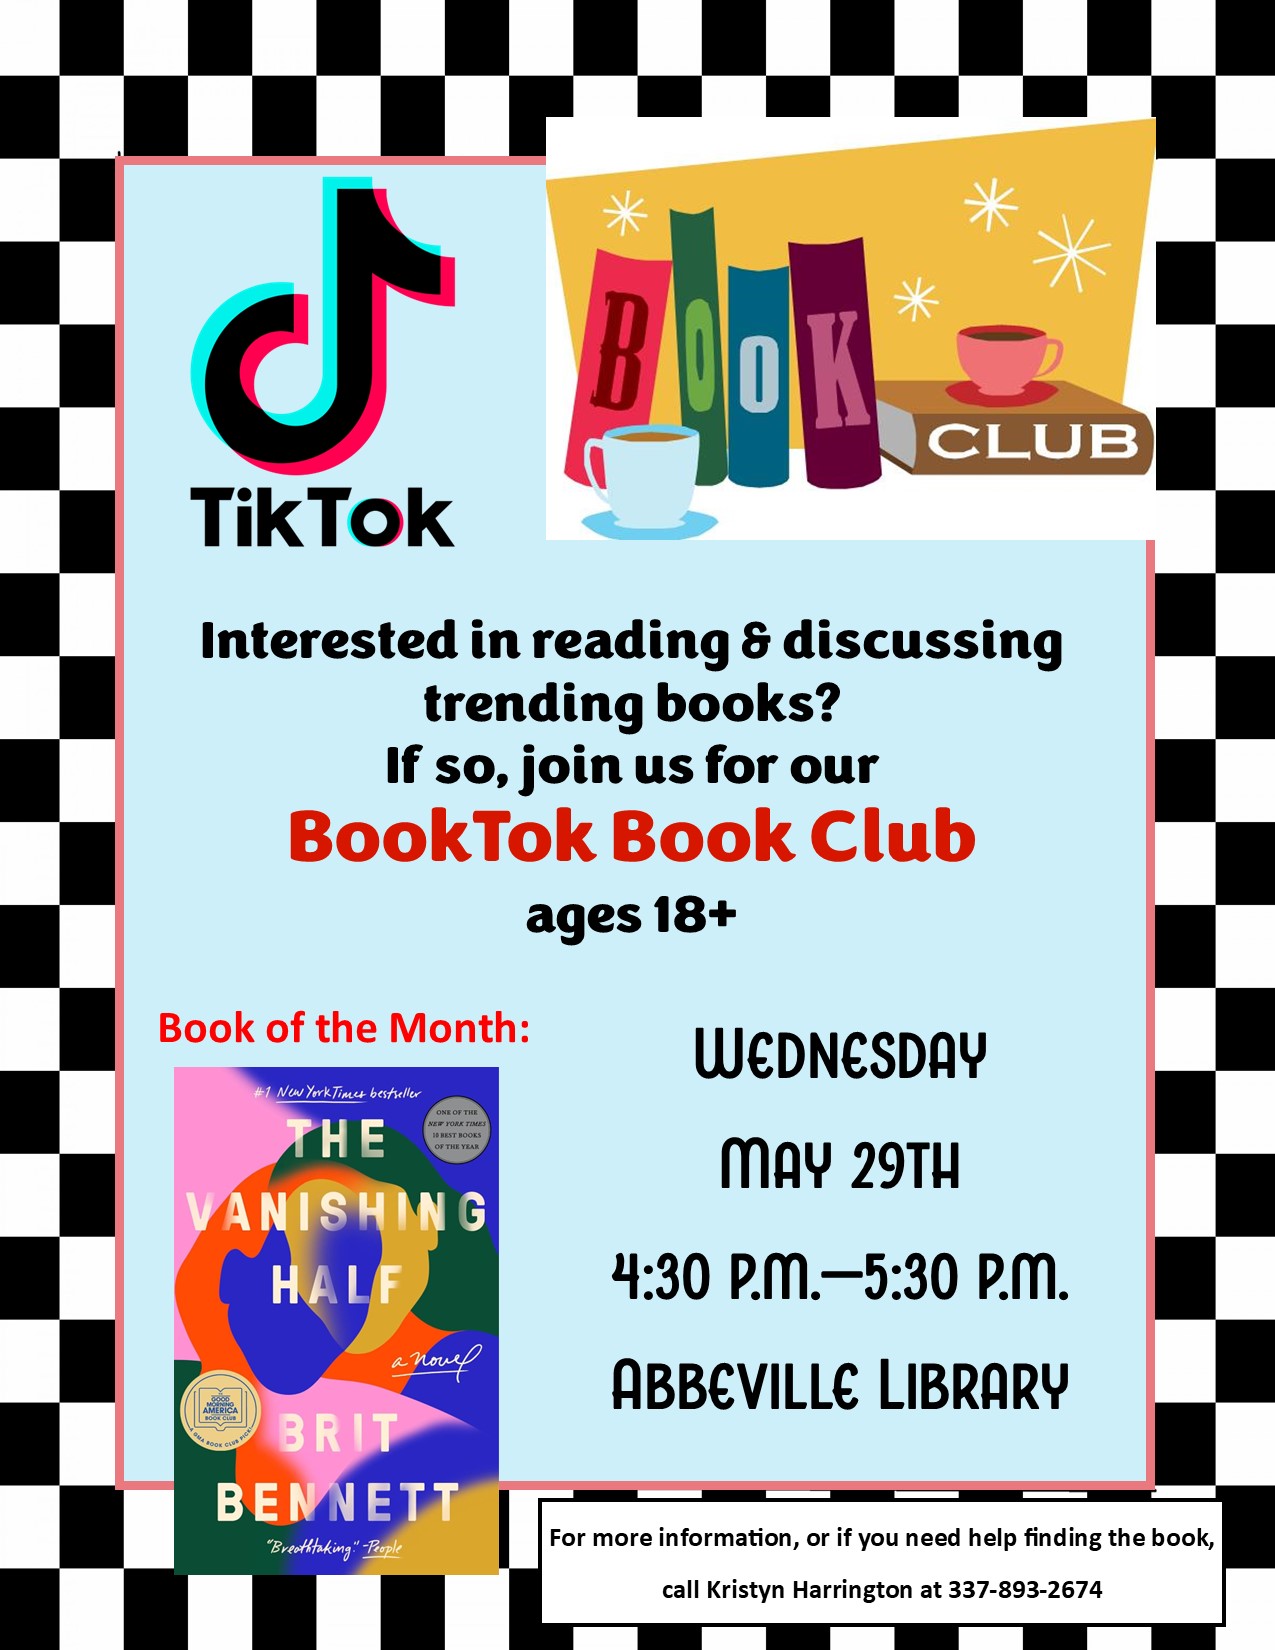 BookTok Book Club for Ages 18+